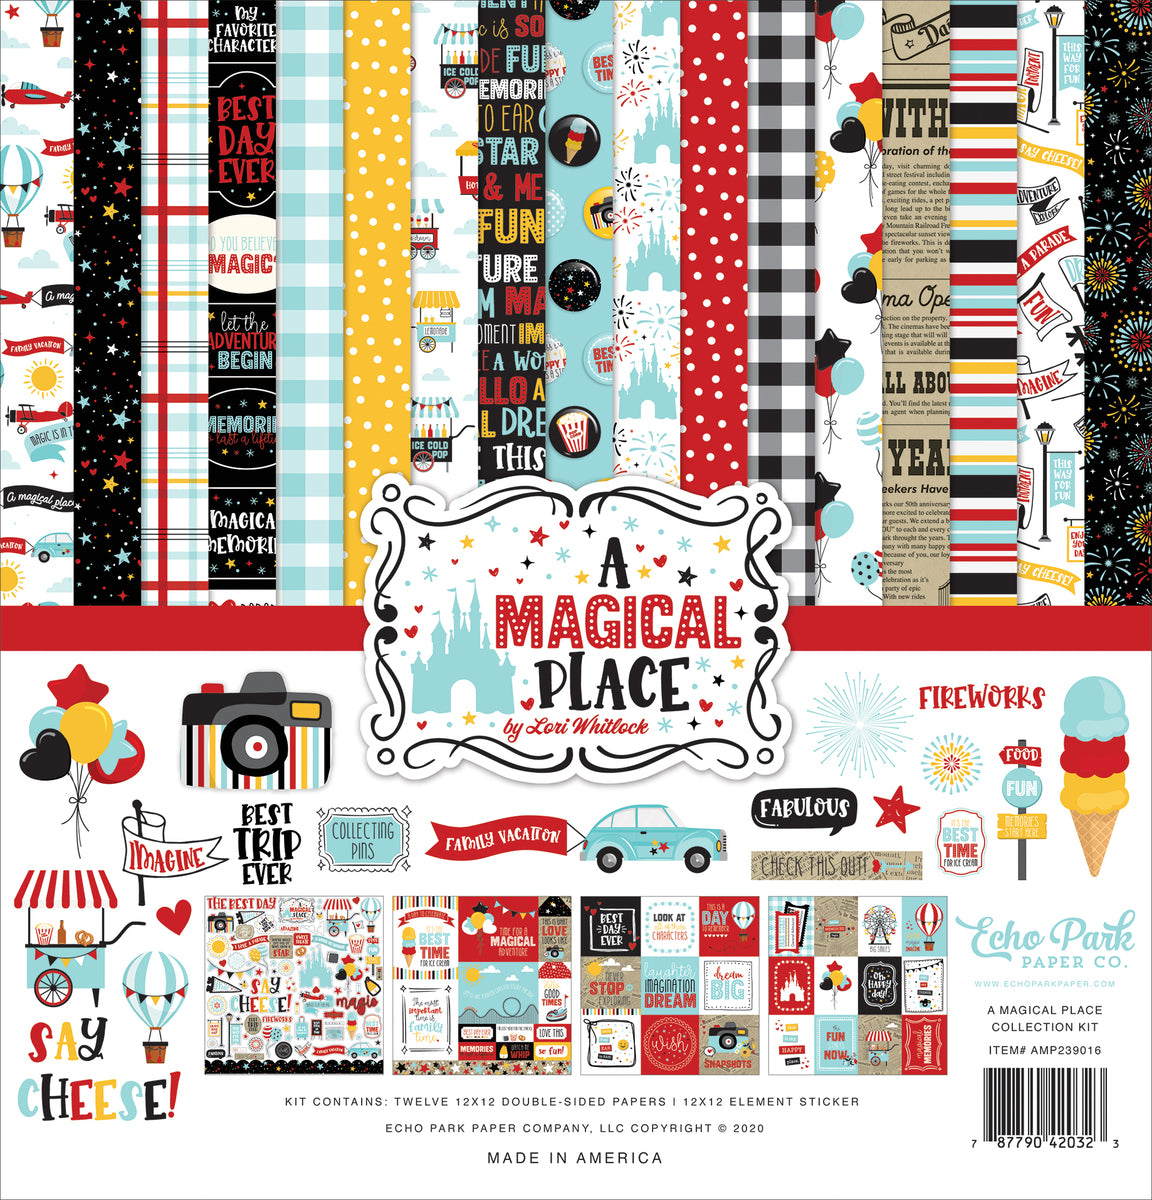 A MAGICAL PLACE - 12x12 collection kit with 12 double-sided papers focused on family vacation - Echo Park Paper